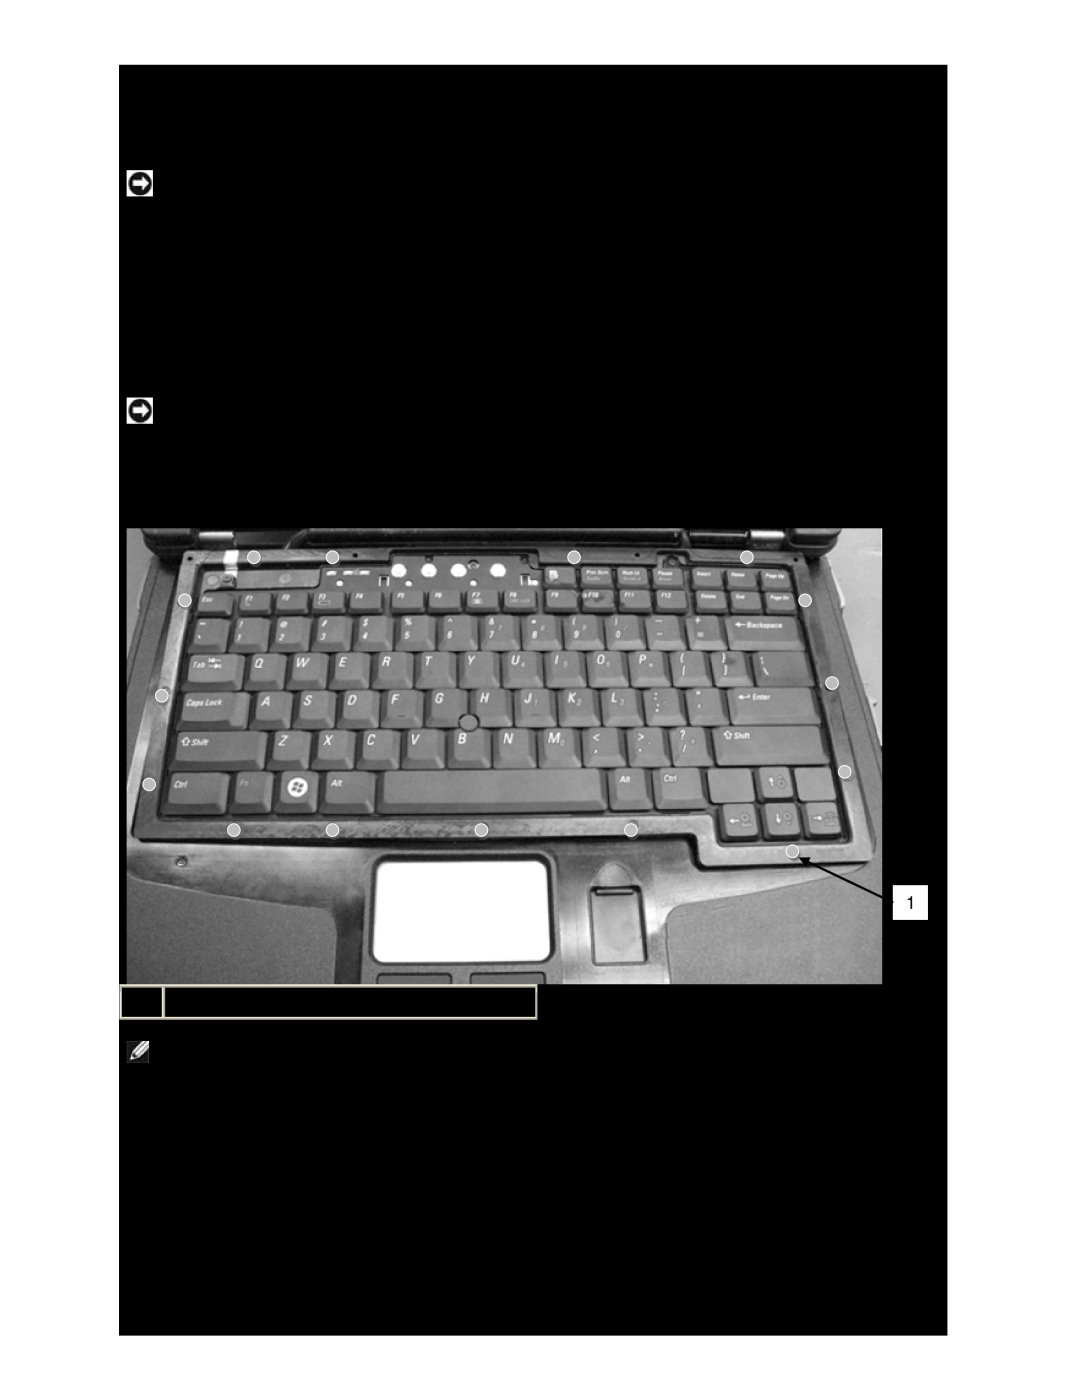 Dell service manual XFR D630 Product Information Guide and in the XFR D630 User’s Guide 